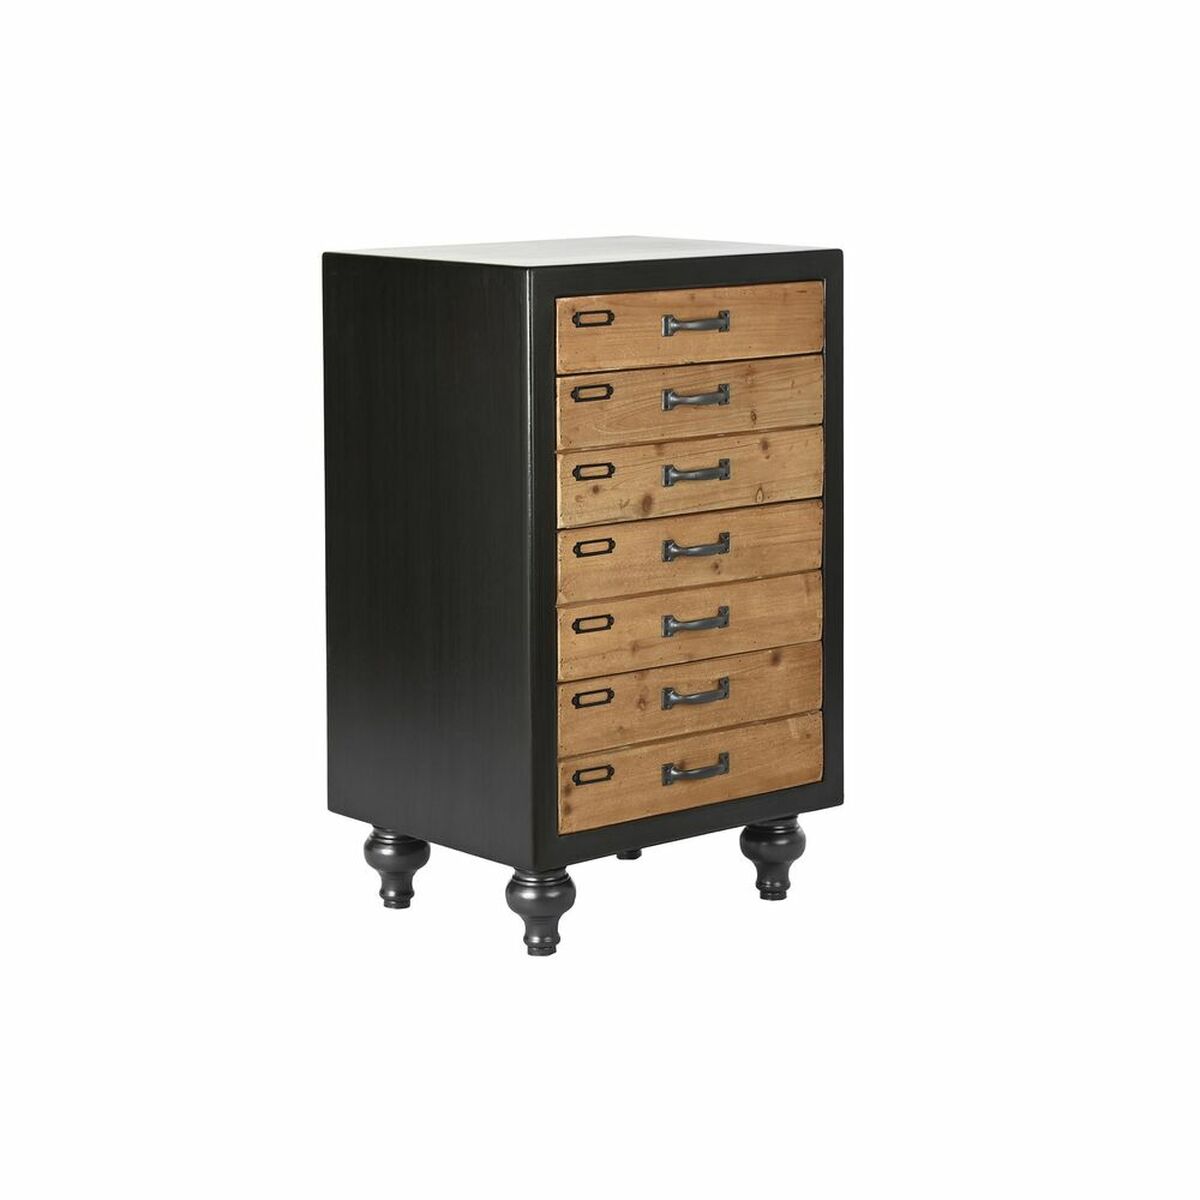 Black and Wood Chest of drawers in Vintage Style (47 x 38 x 77 cm)